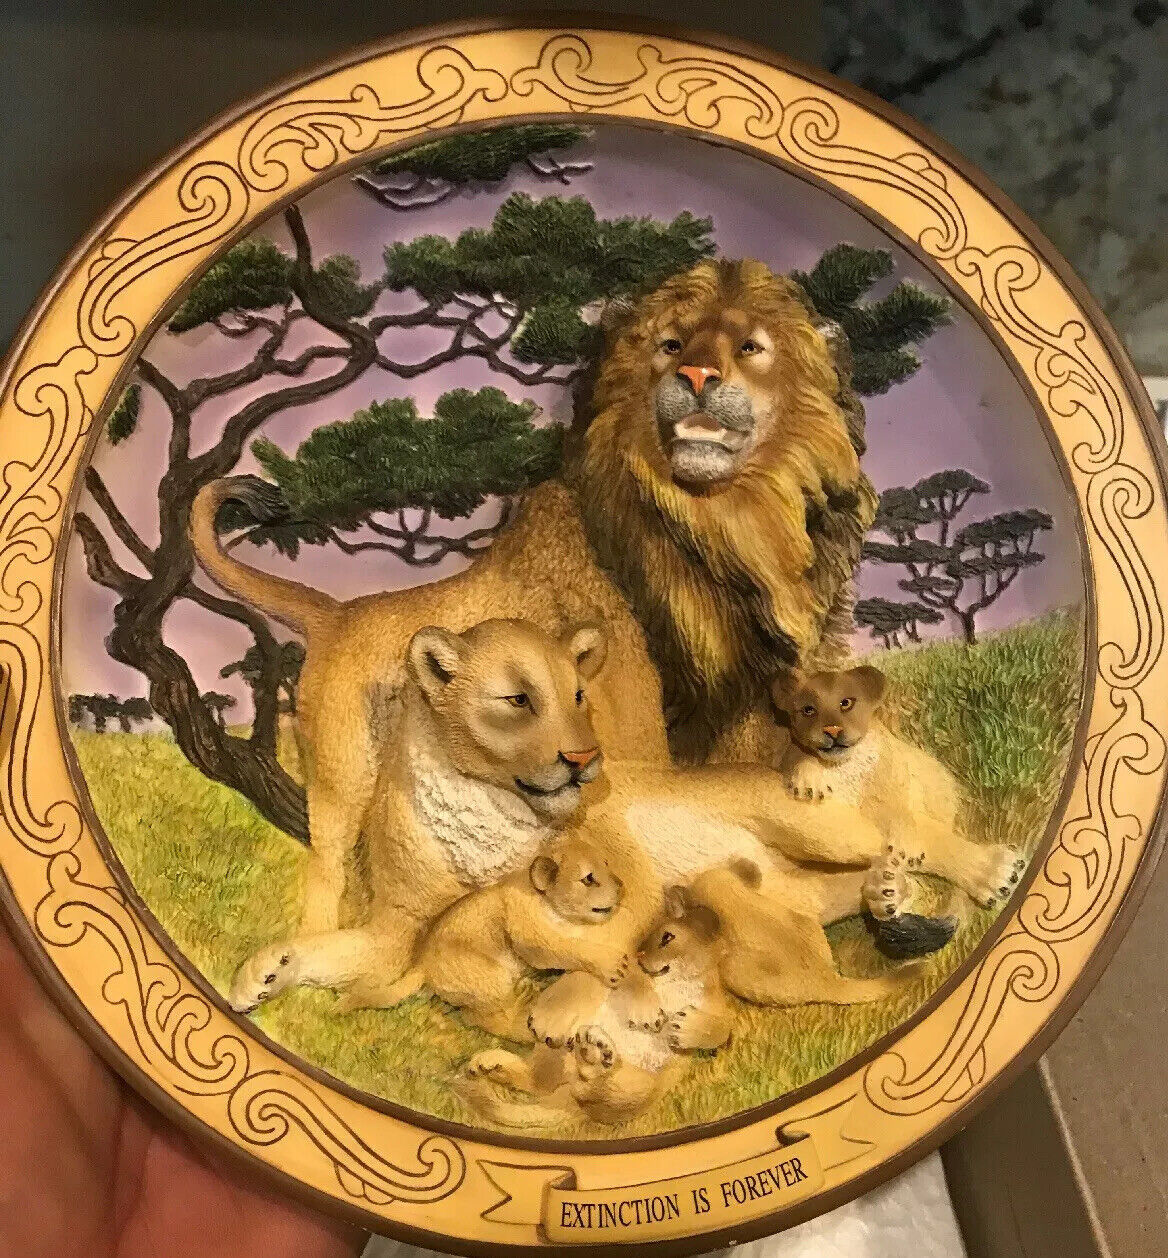 Bush Gardens African Lion “ Extinction Is Forever” 3D Collector Plate #560/7500